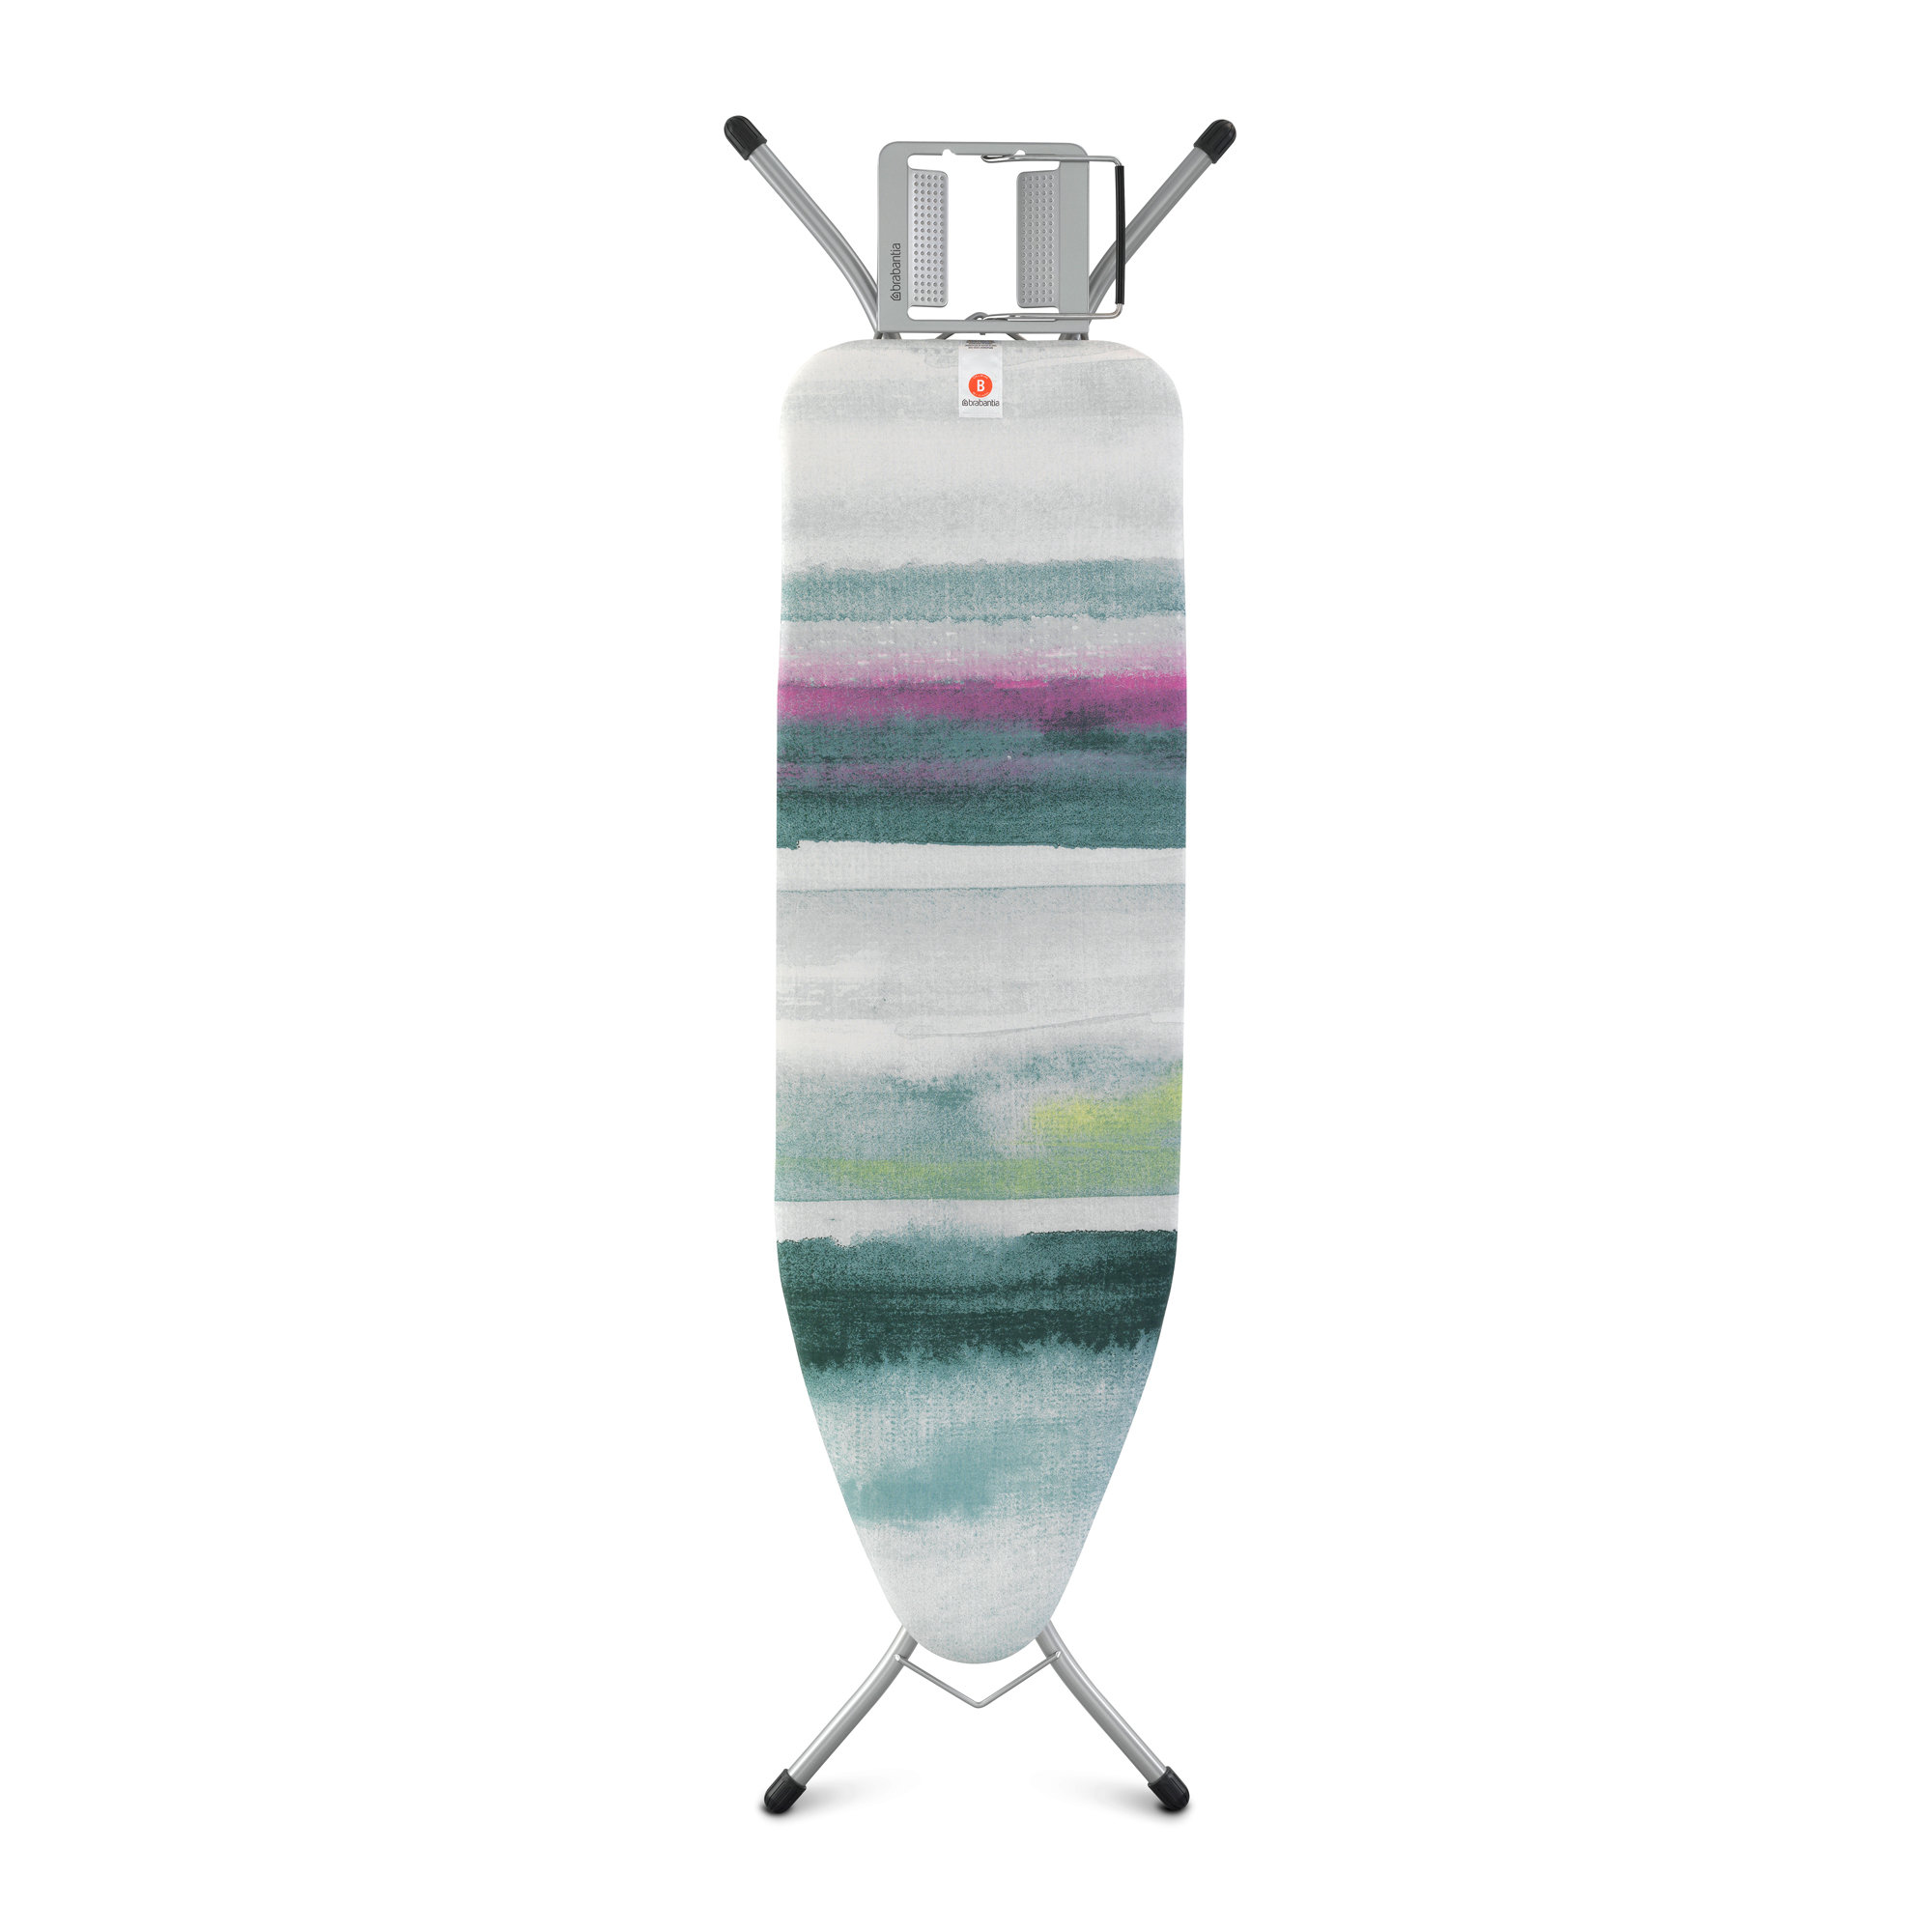 Standard Size B Lavender Brabantia Ironing Board with Solid Steam Iron Rest 